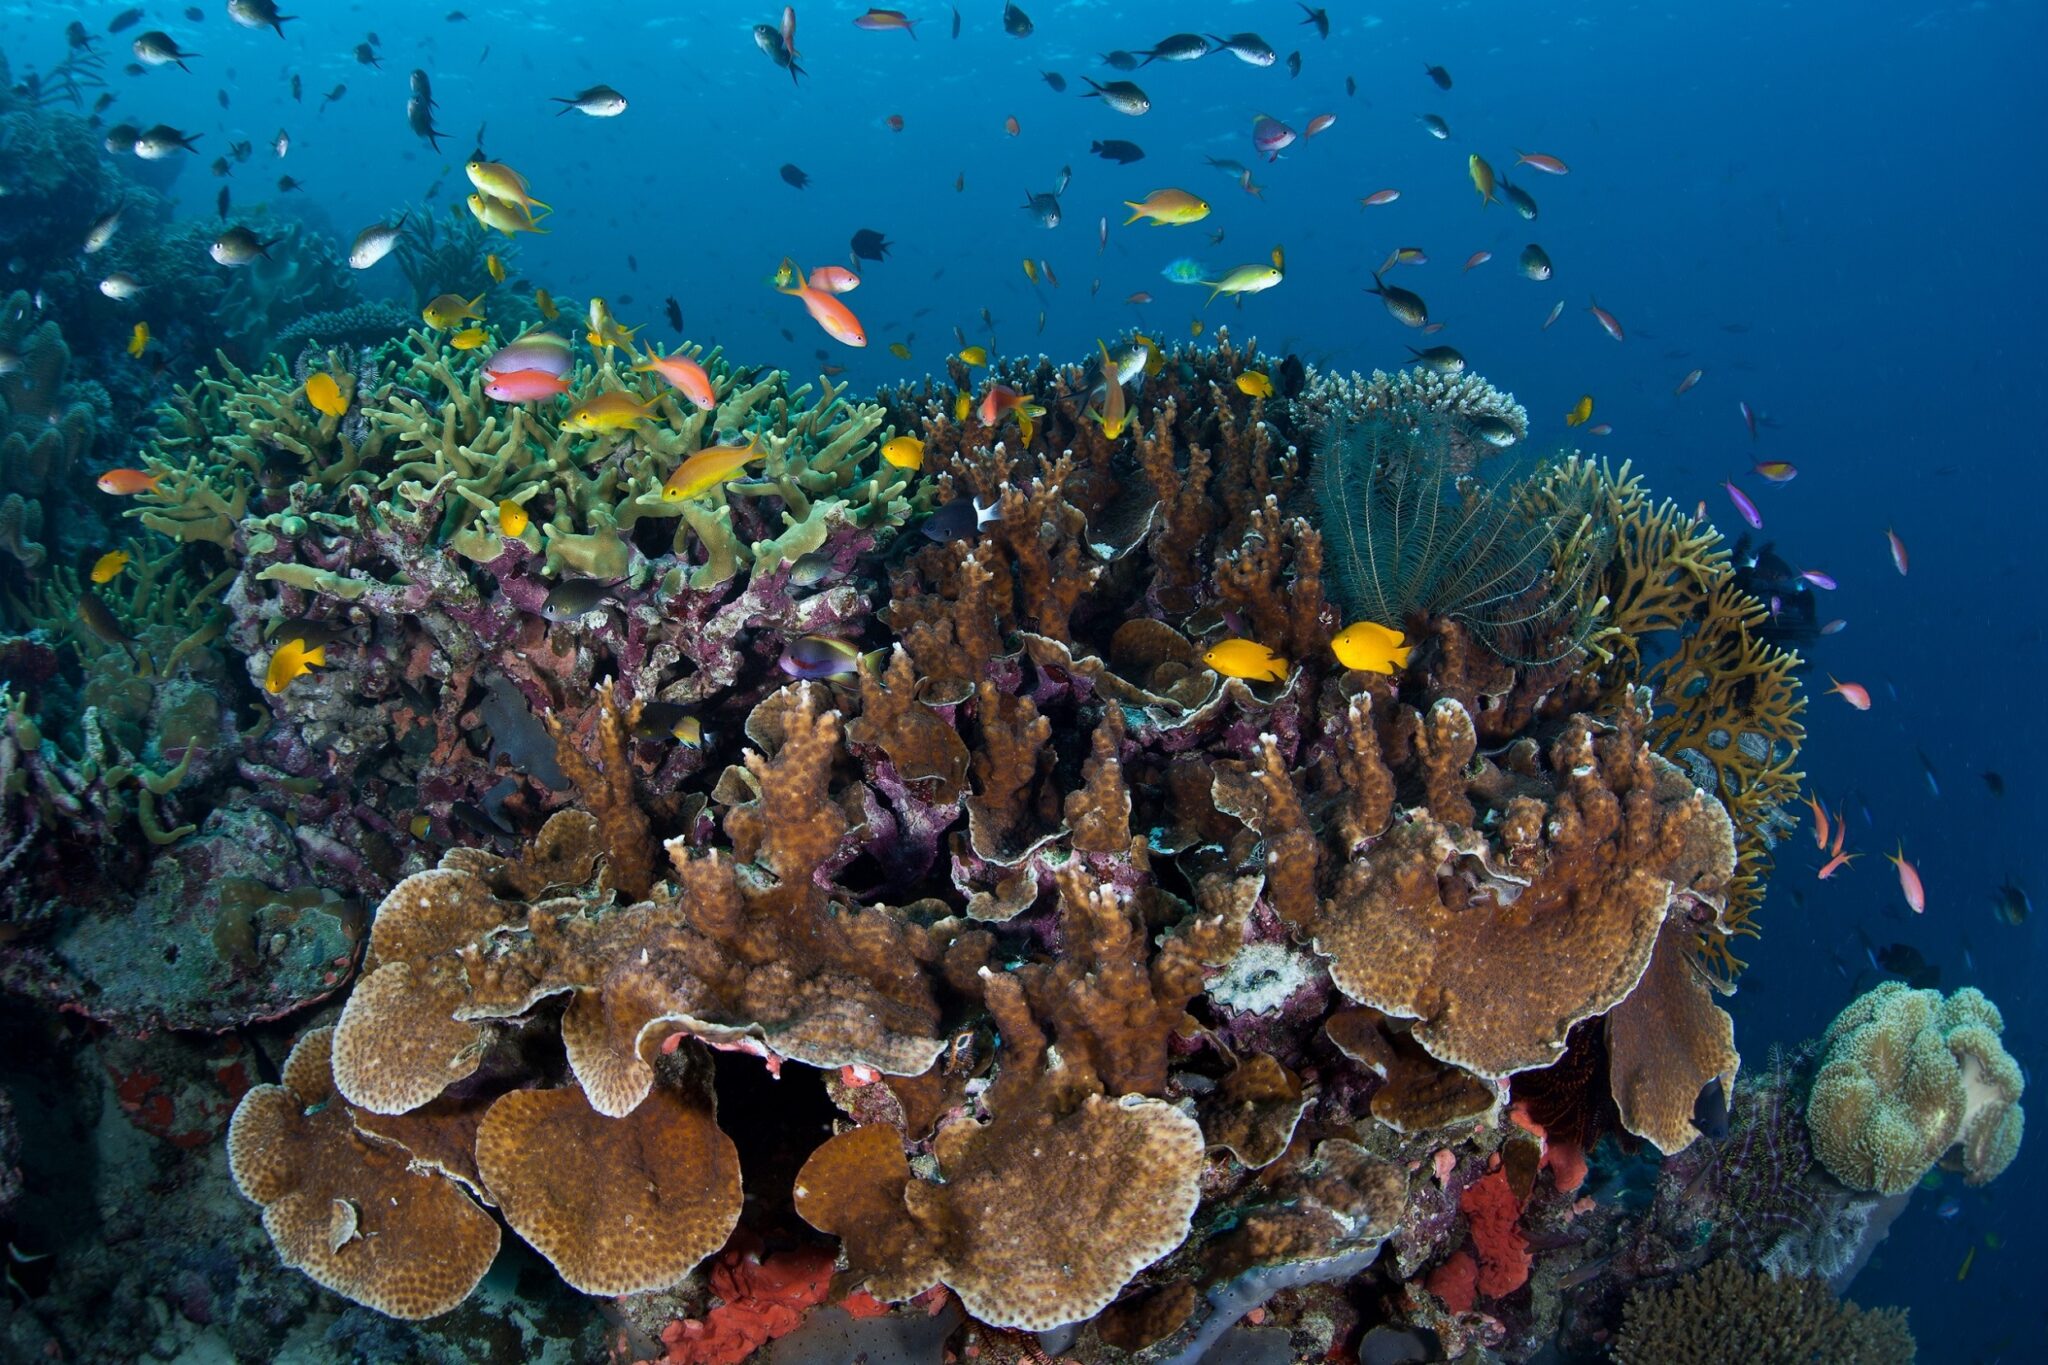 A vibrant coral reef in the coral triangle